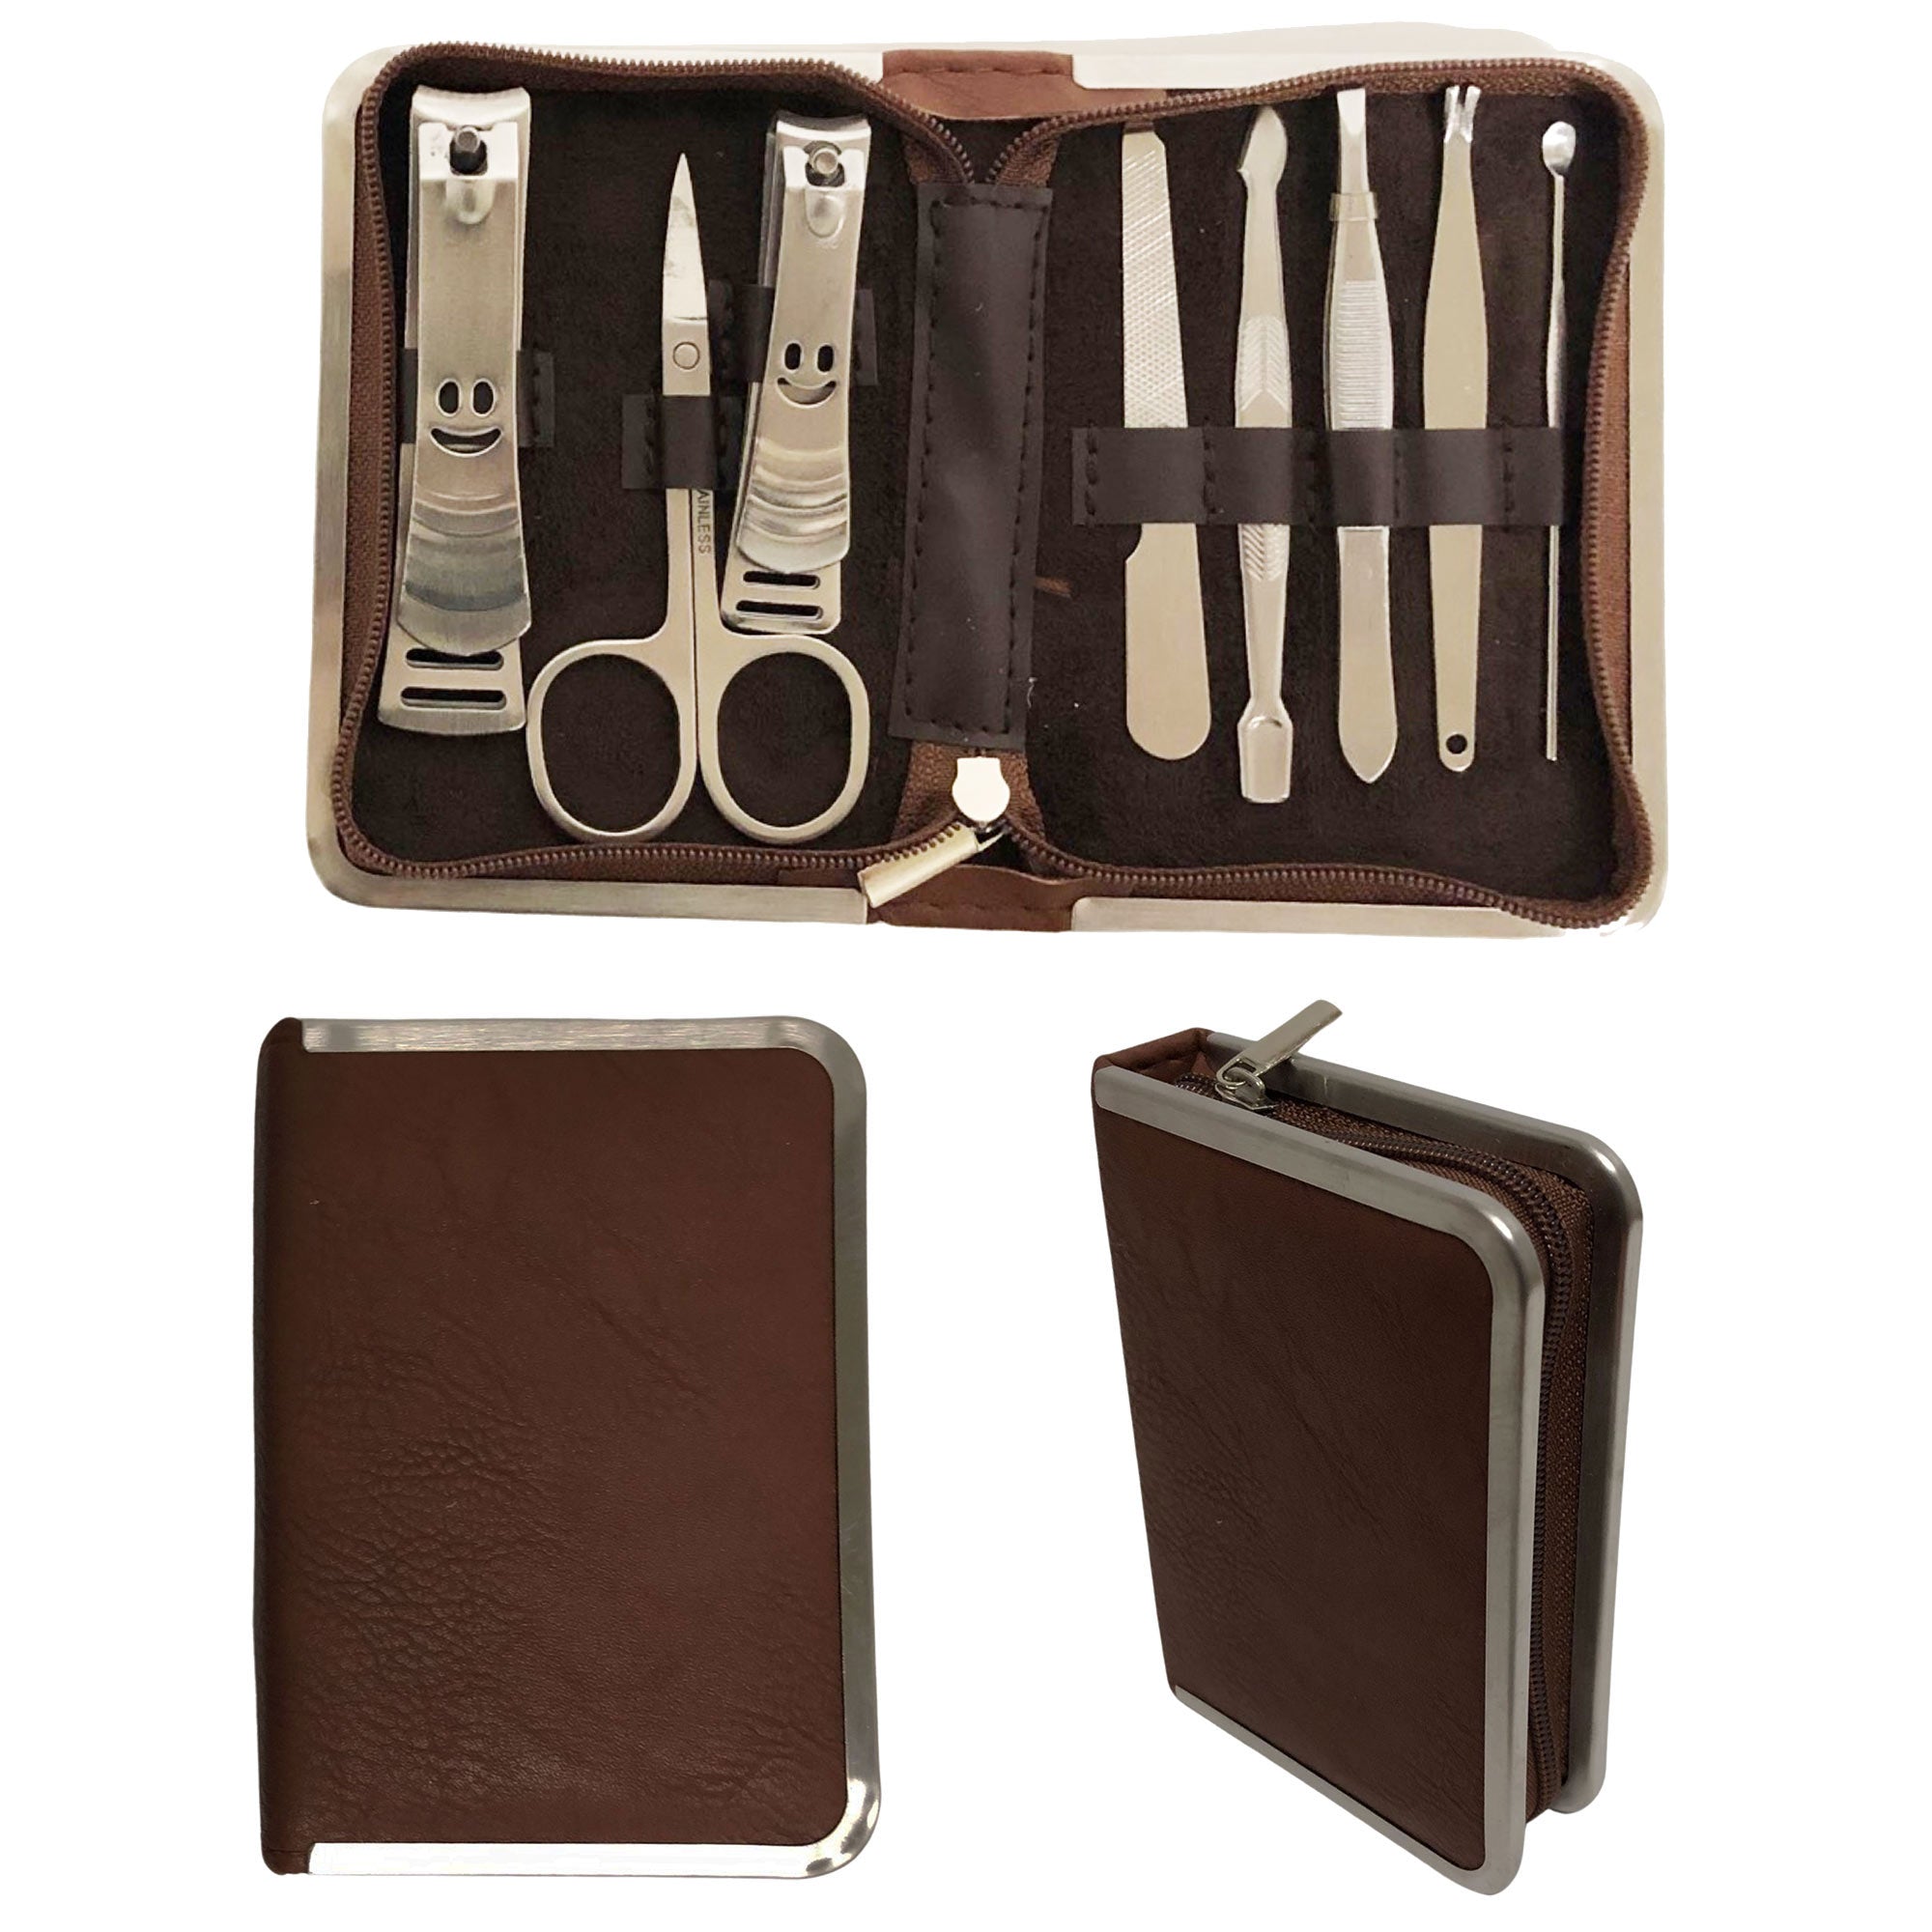 CLEARANCE BROWN MANICURE SET STAINLESS STEEL (CASE OF 24 - $2.50 / PIECE)  Wholesale 8 Piece Stainless Steel Manicure Set in Brown SKU: 9598-LE-BROWN-24